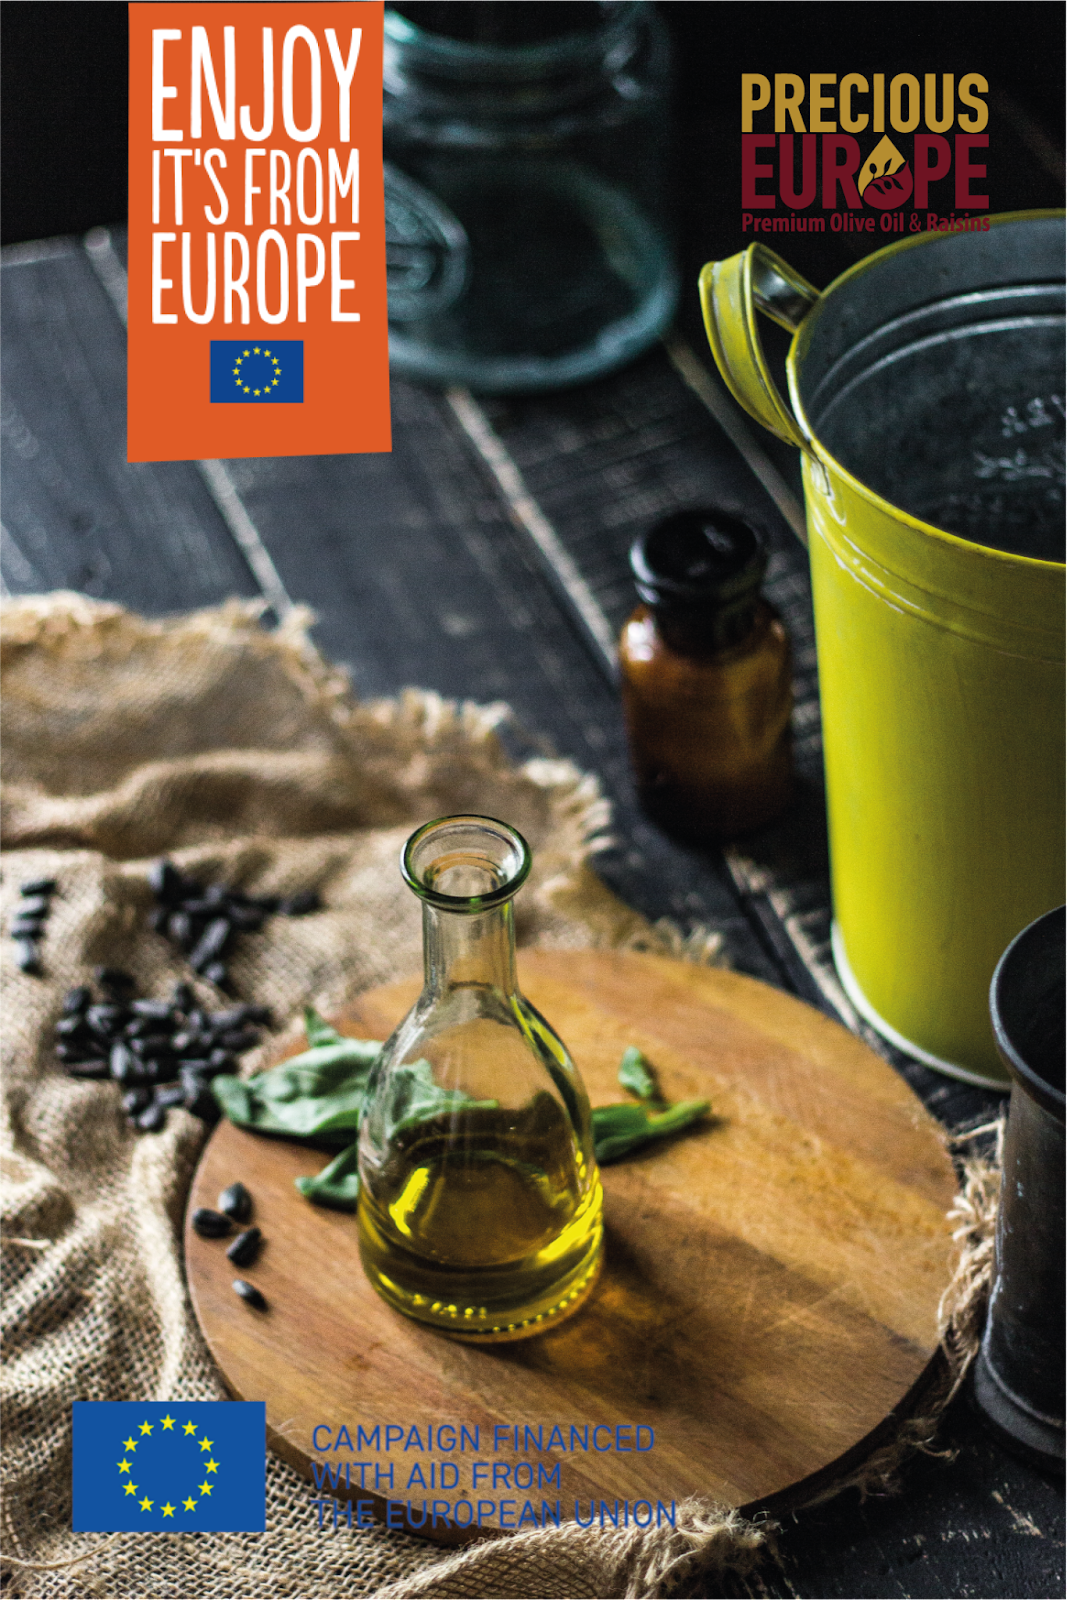 ”PRECIOUS EUROPE”, a 3-year campaign concerning the promotion of European high-quality raisins and premium olive oil